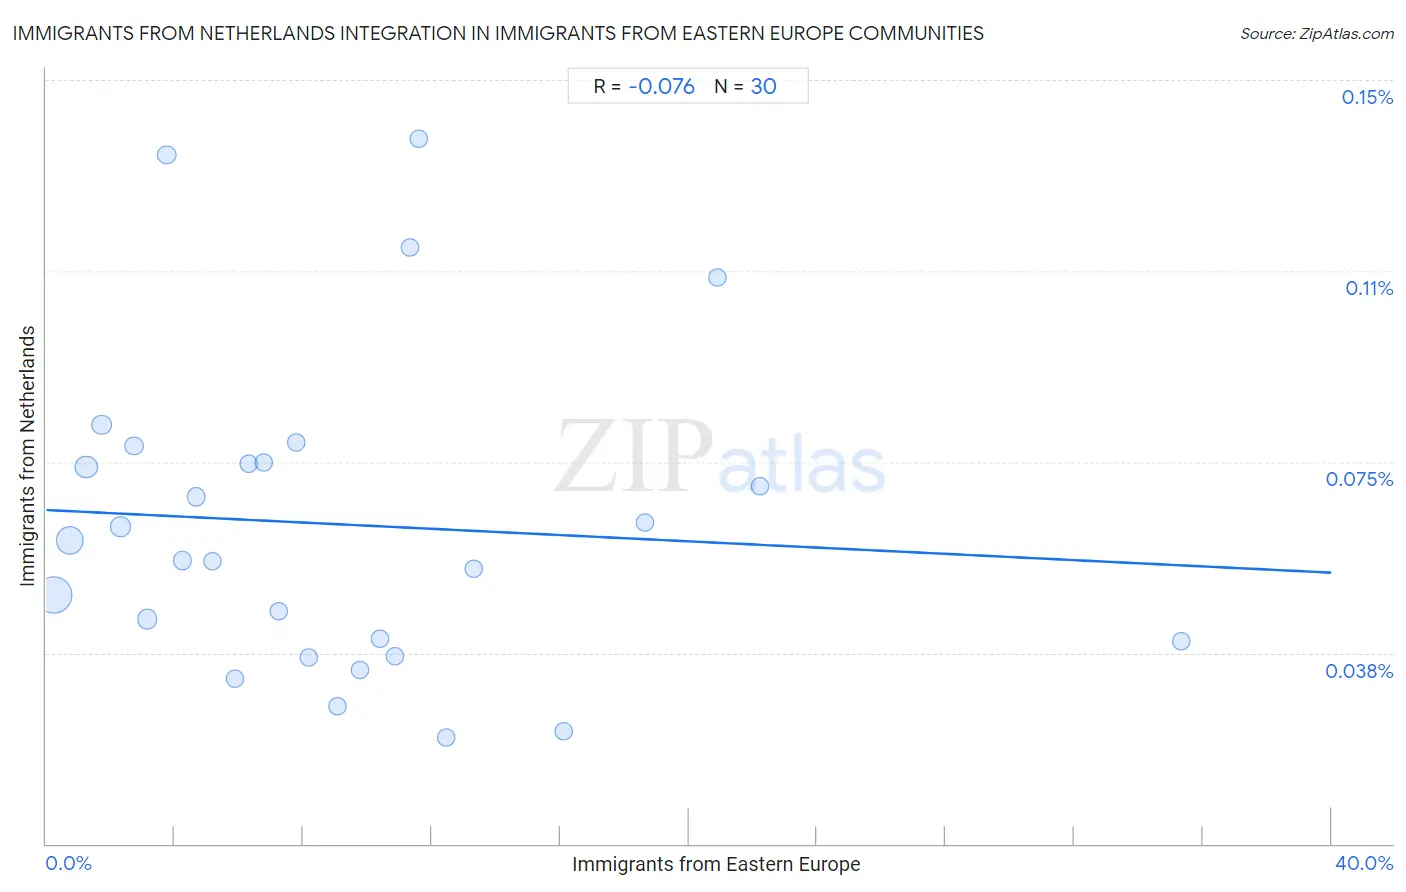 Immigrants from Eastern Europe Integration in Immigrants from Netherlands Communities